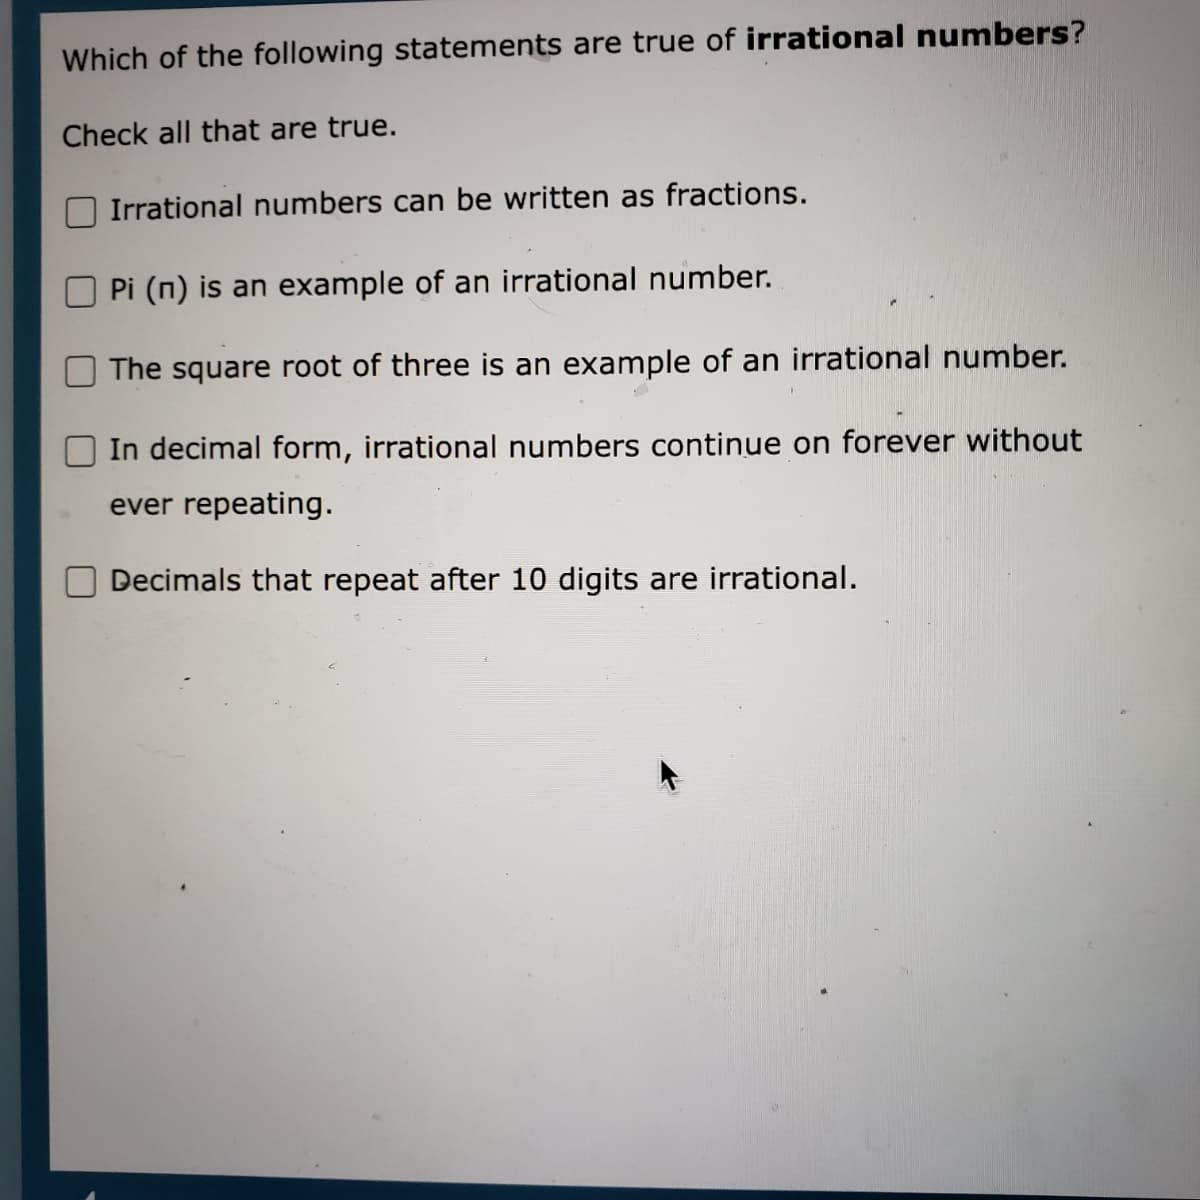 Which of the following statements are true of irrational numbers?
Check all that are true.
Irrational numbers can be written as fractions.
Pi (n) is an example of an irrational number.
The square root of three is an example of an irrational number.
In decimal form, irrational numbers continue on forever without
ever repeating.
Decimals that repeat after 10 digits are irrational.
